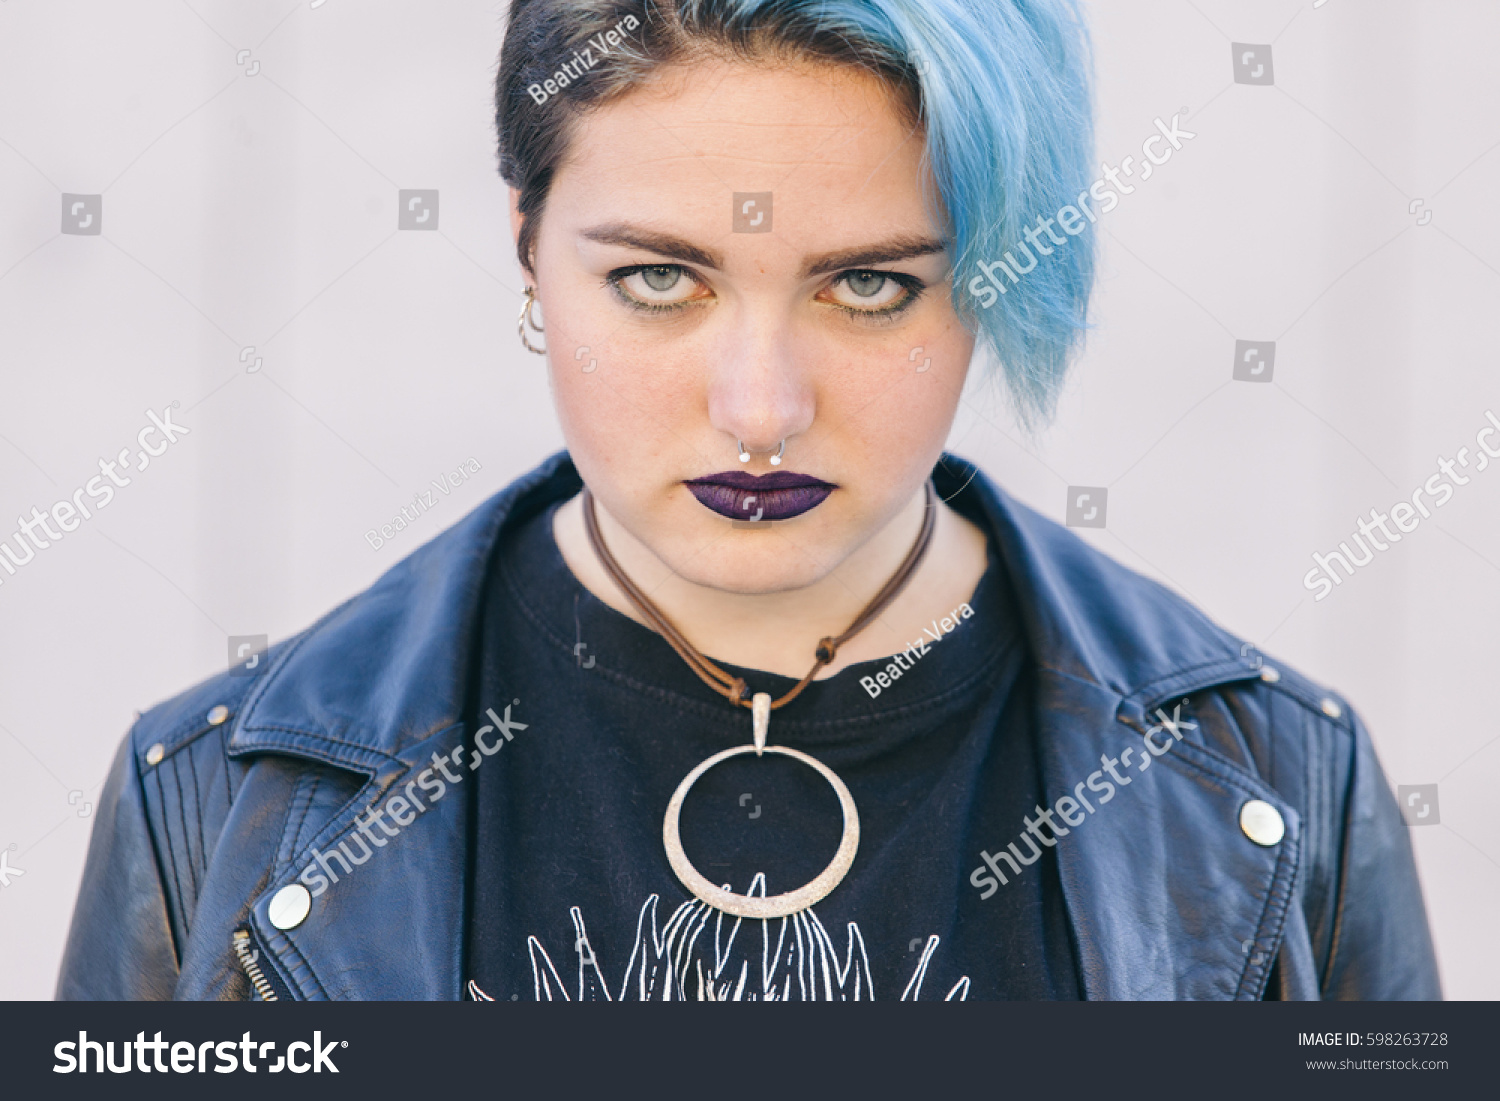 stock-photo-close-up-of-a-teen-punk-woman-with-a-nose-piercing-dyed-blue-hair-and-dark-lips-isolated-on-the-598263728.jpg